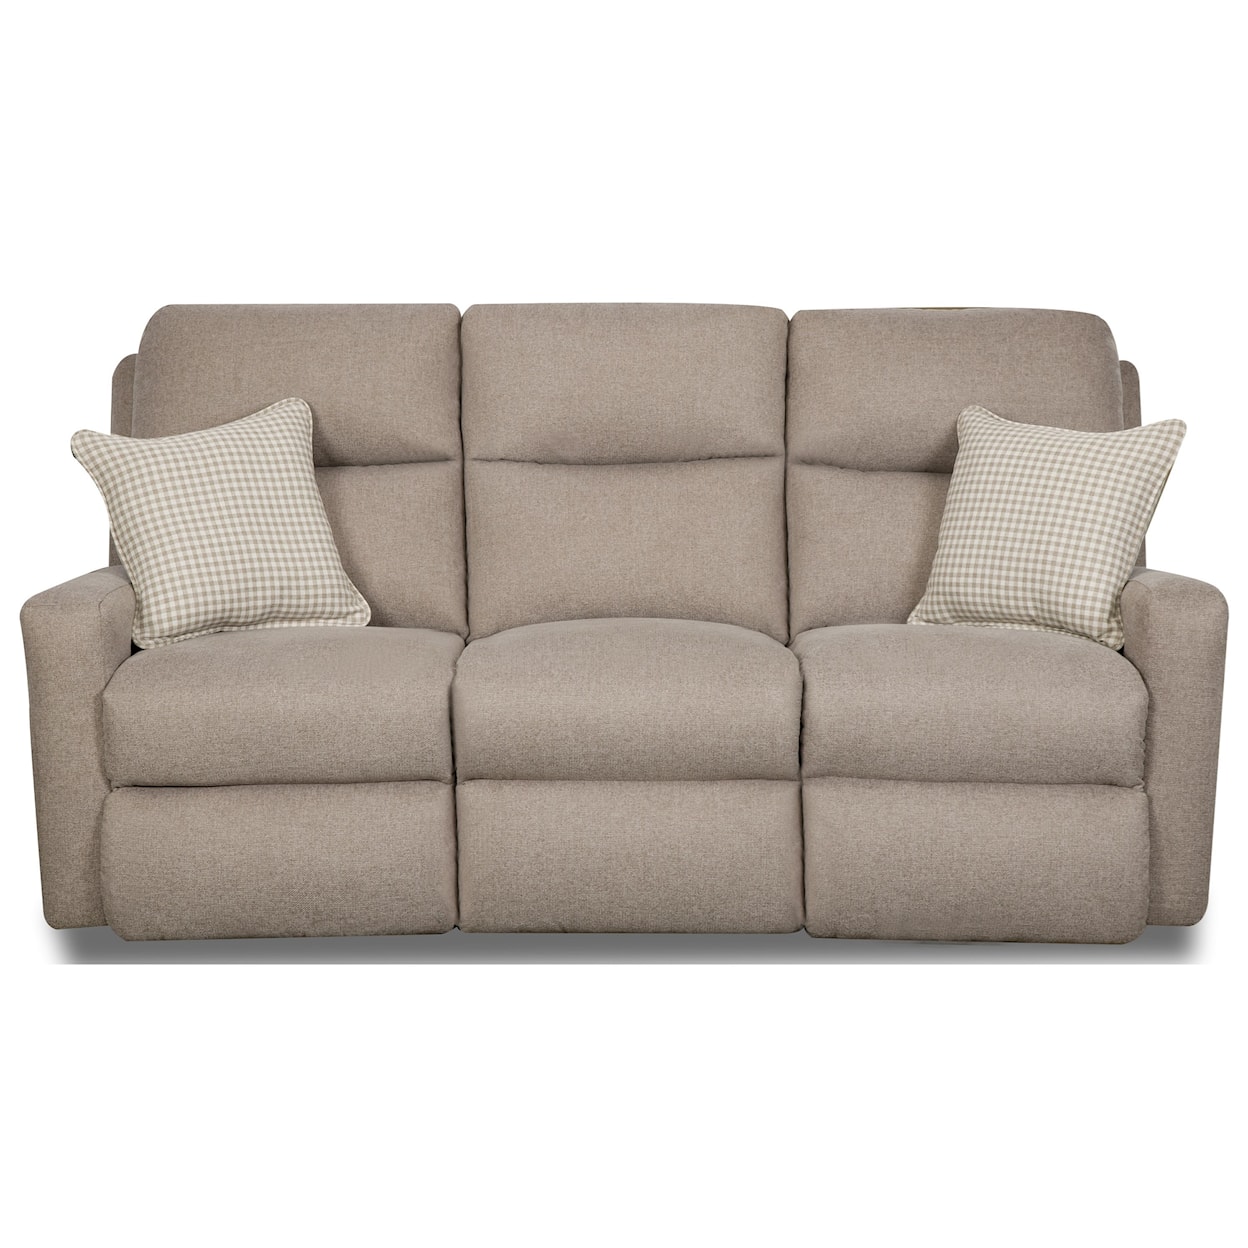 Southern Motion Metro Double Reclining Sofa